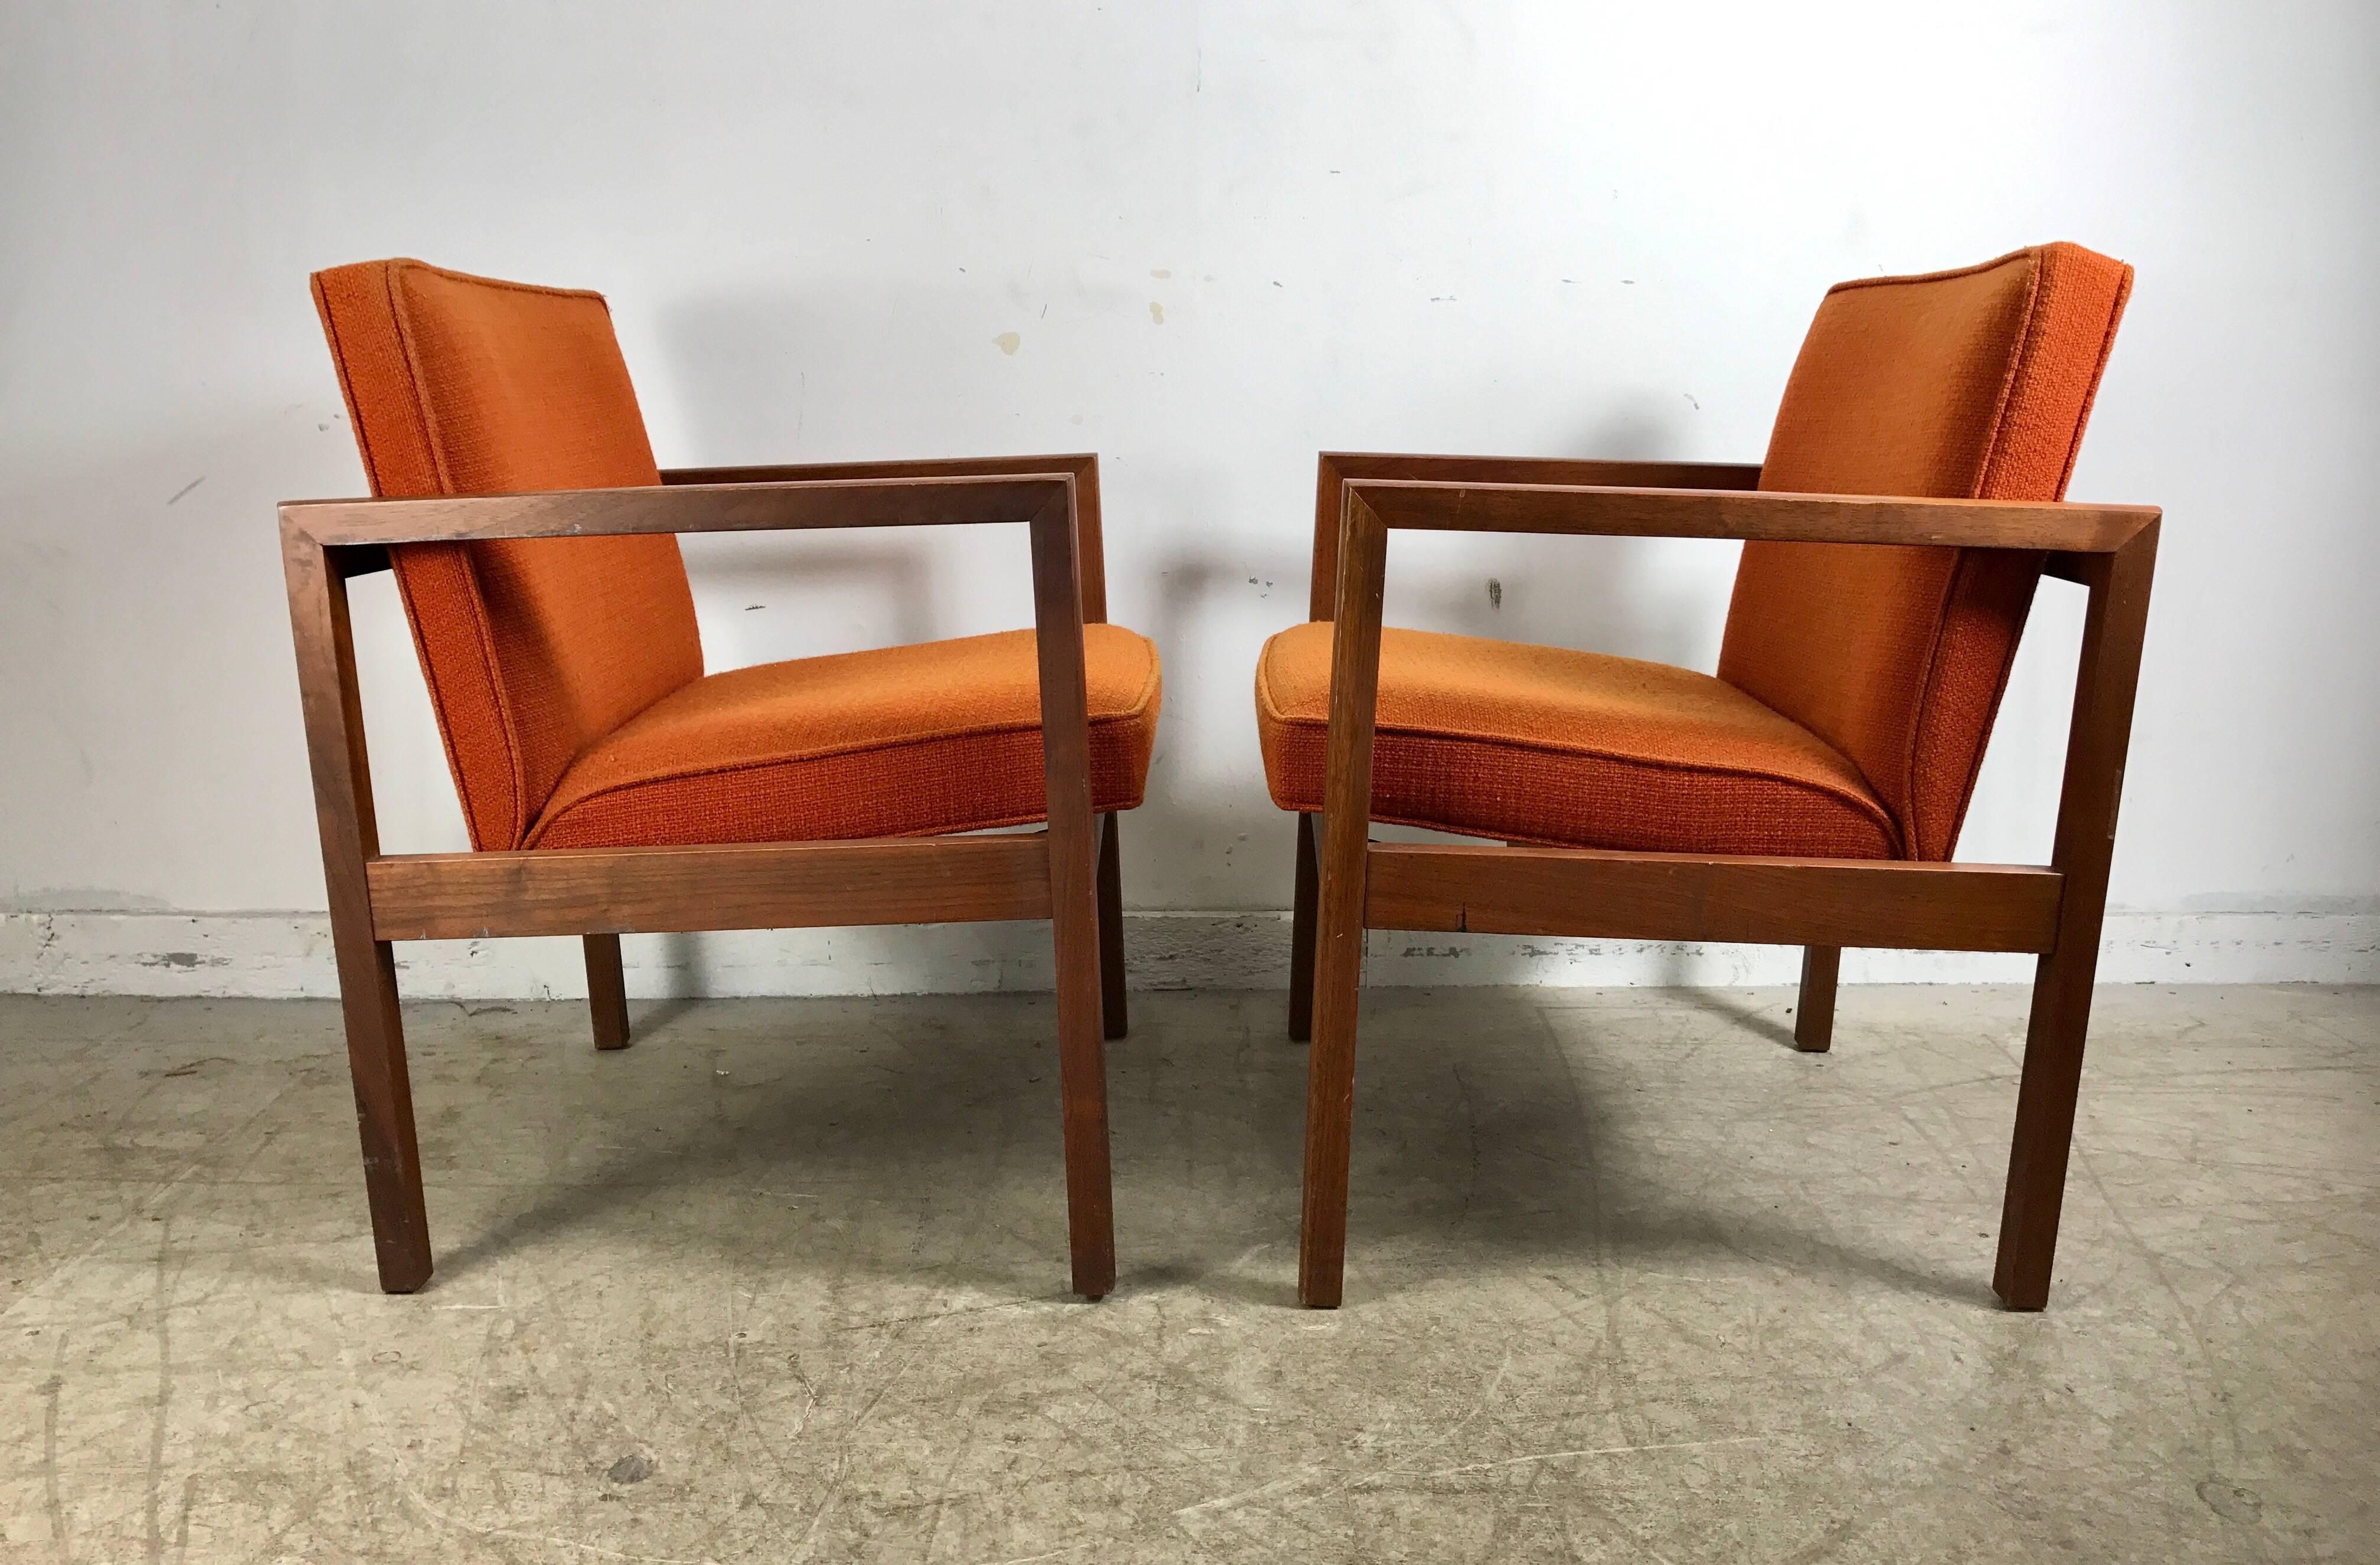 Pair midcentury solid walnut lounge chairs by Stow Davis, handsome architectural profile in the style of Jens Risom. Superior quality and construction, retains original orange wool fabric, extremely comfortable. Hand delivery avail to New York City